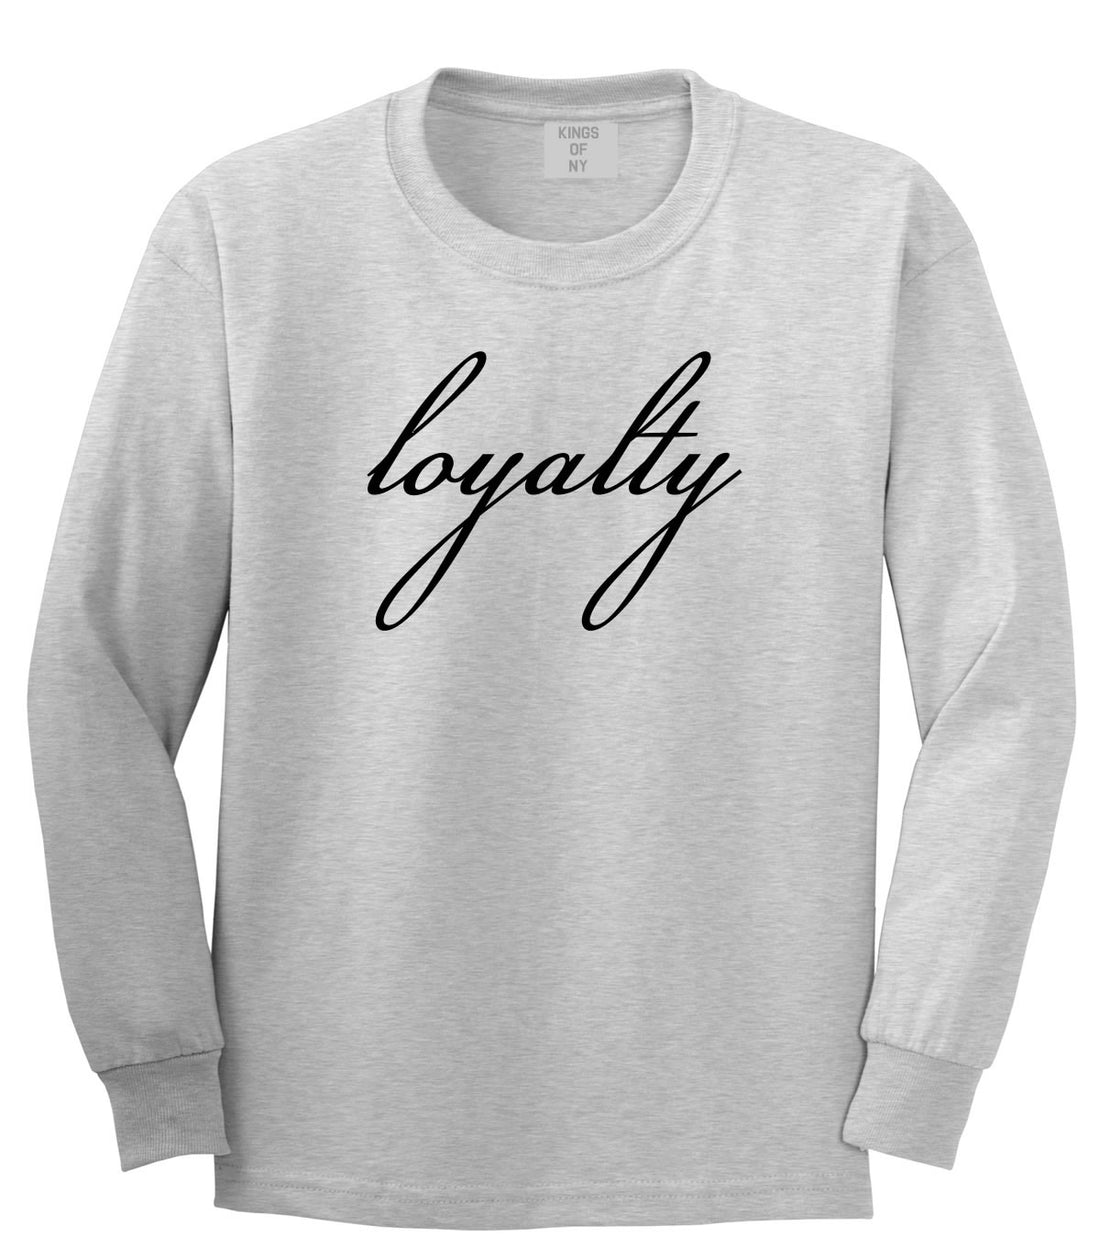 Loyalty Respect Aint New York Hoes Long Sleeve T-Shirt In Grey by Kings Of NY